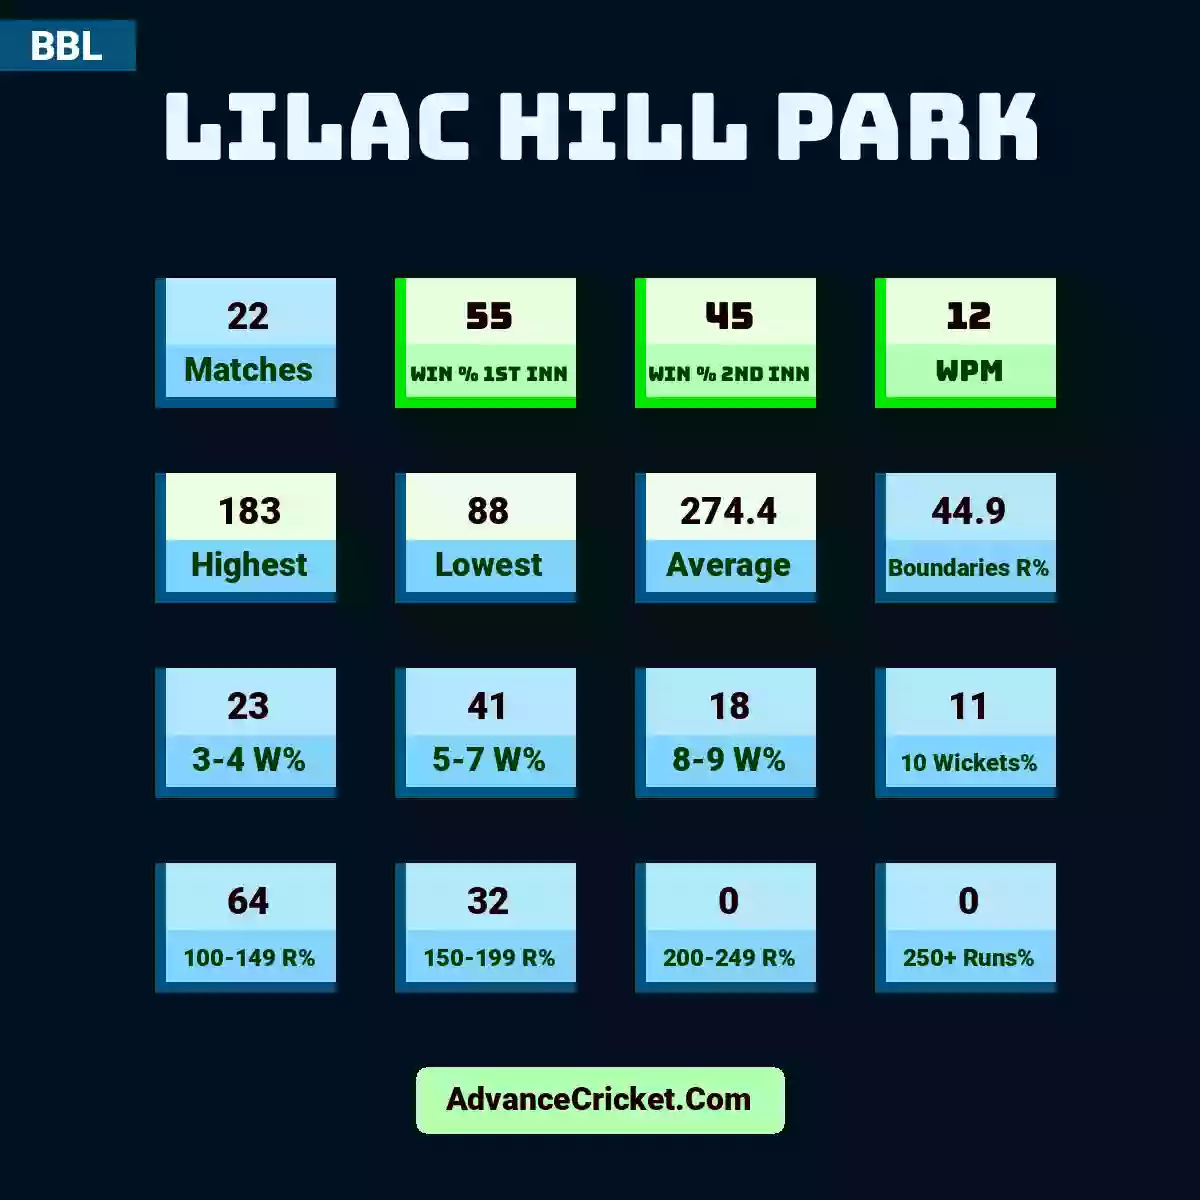 Image showing Lilac Hill Park with Matches: 22, Win % 1st Inn: 55, Win % 2nd Inn: 45, WPM: 12, Highest: 183, Lowest: 88, Average: 274.4, Boundaries R%: 44.9, 3-4 W%: 23, 5-7 W%: 41, 8-9 W%: 18, 10 Wickets%: 11, 100-149 R%: 64, 150-199 R%: 32, 200-249 R%: 0, 250+ Runs%: 0.